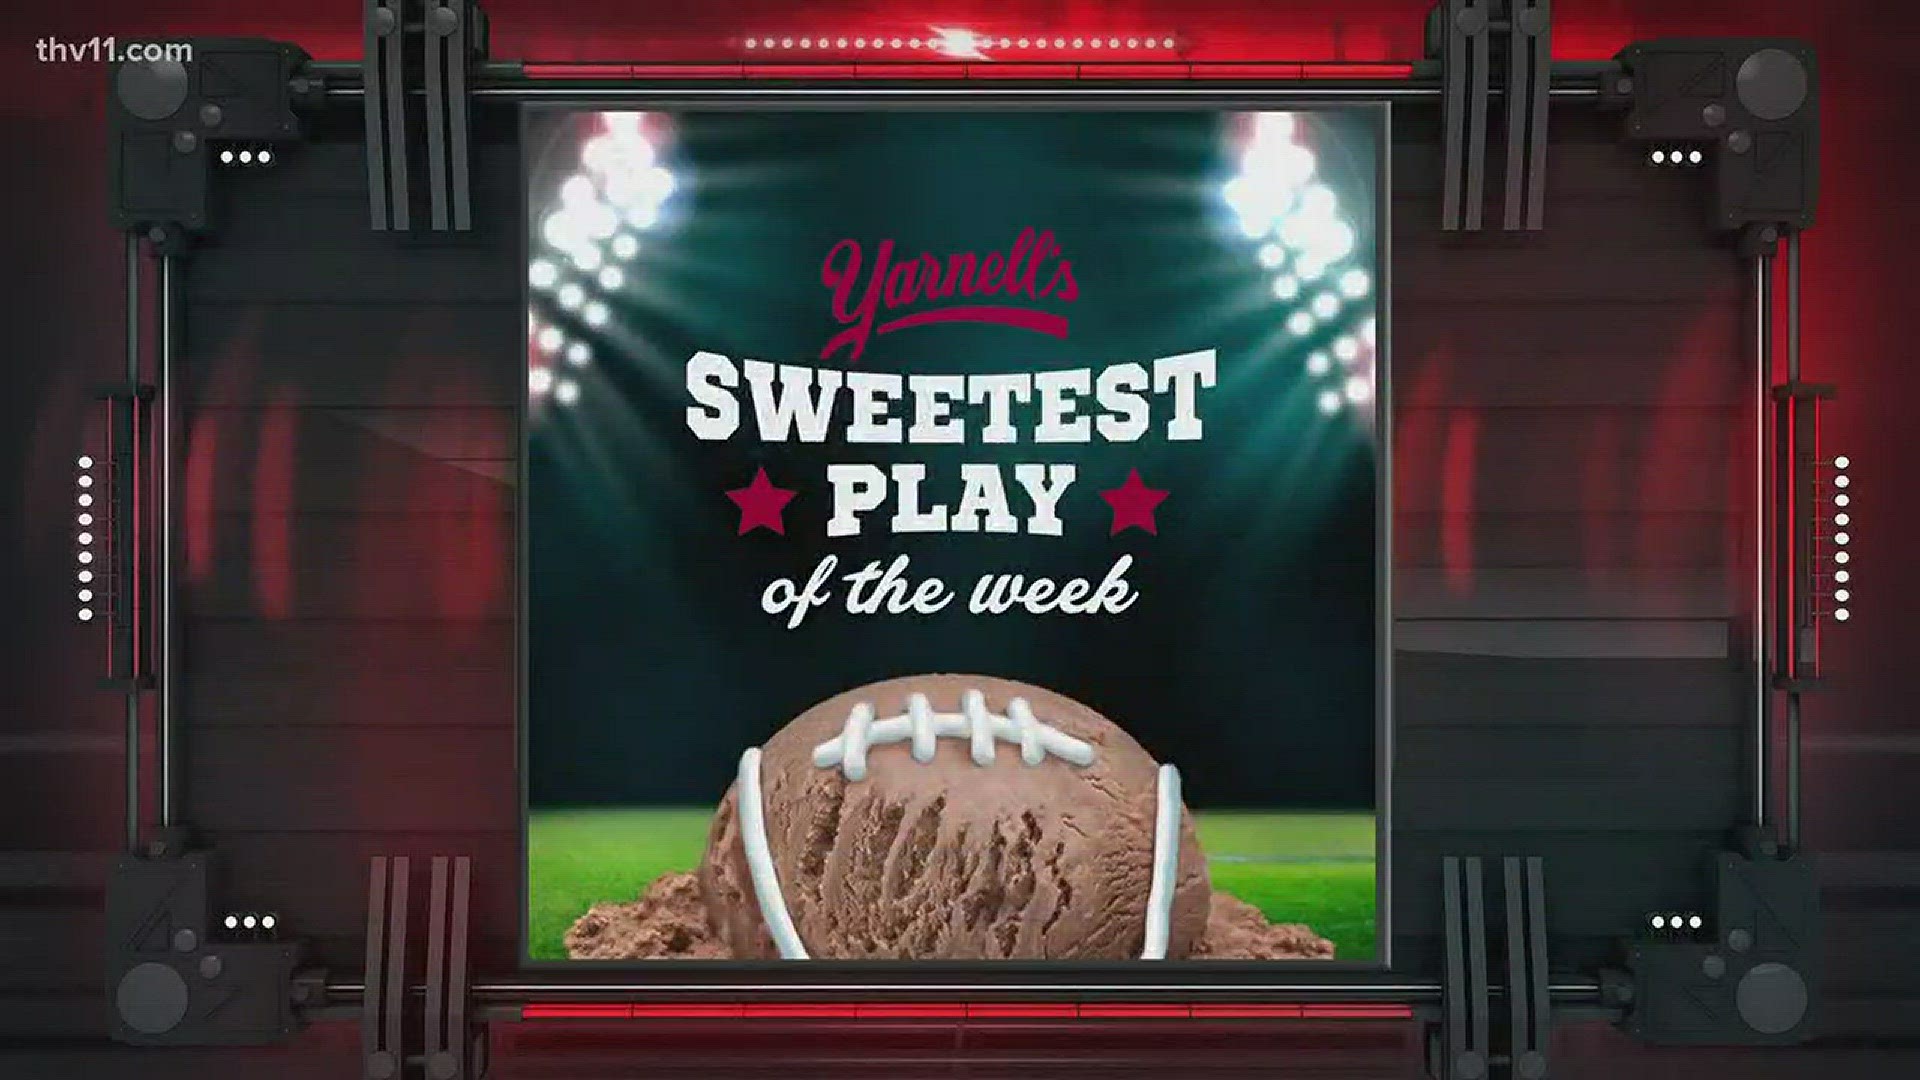 Yarnell's Sweetest Play of the Week Nominees